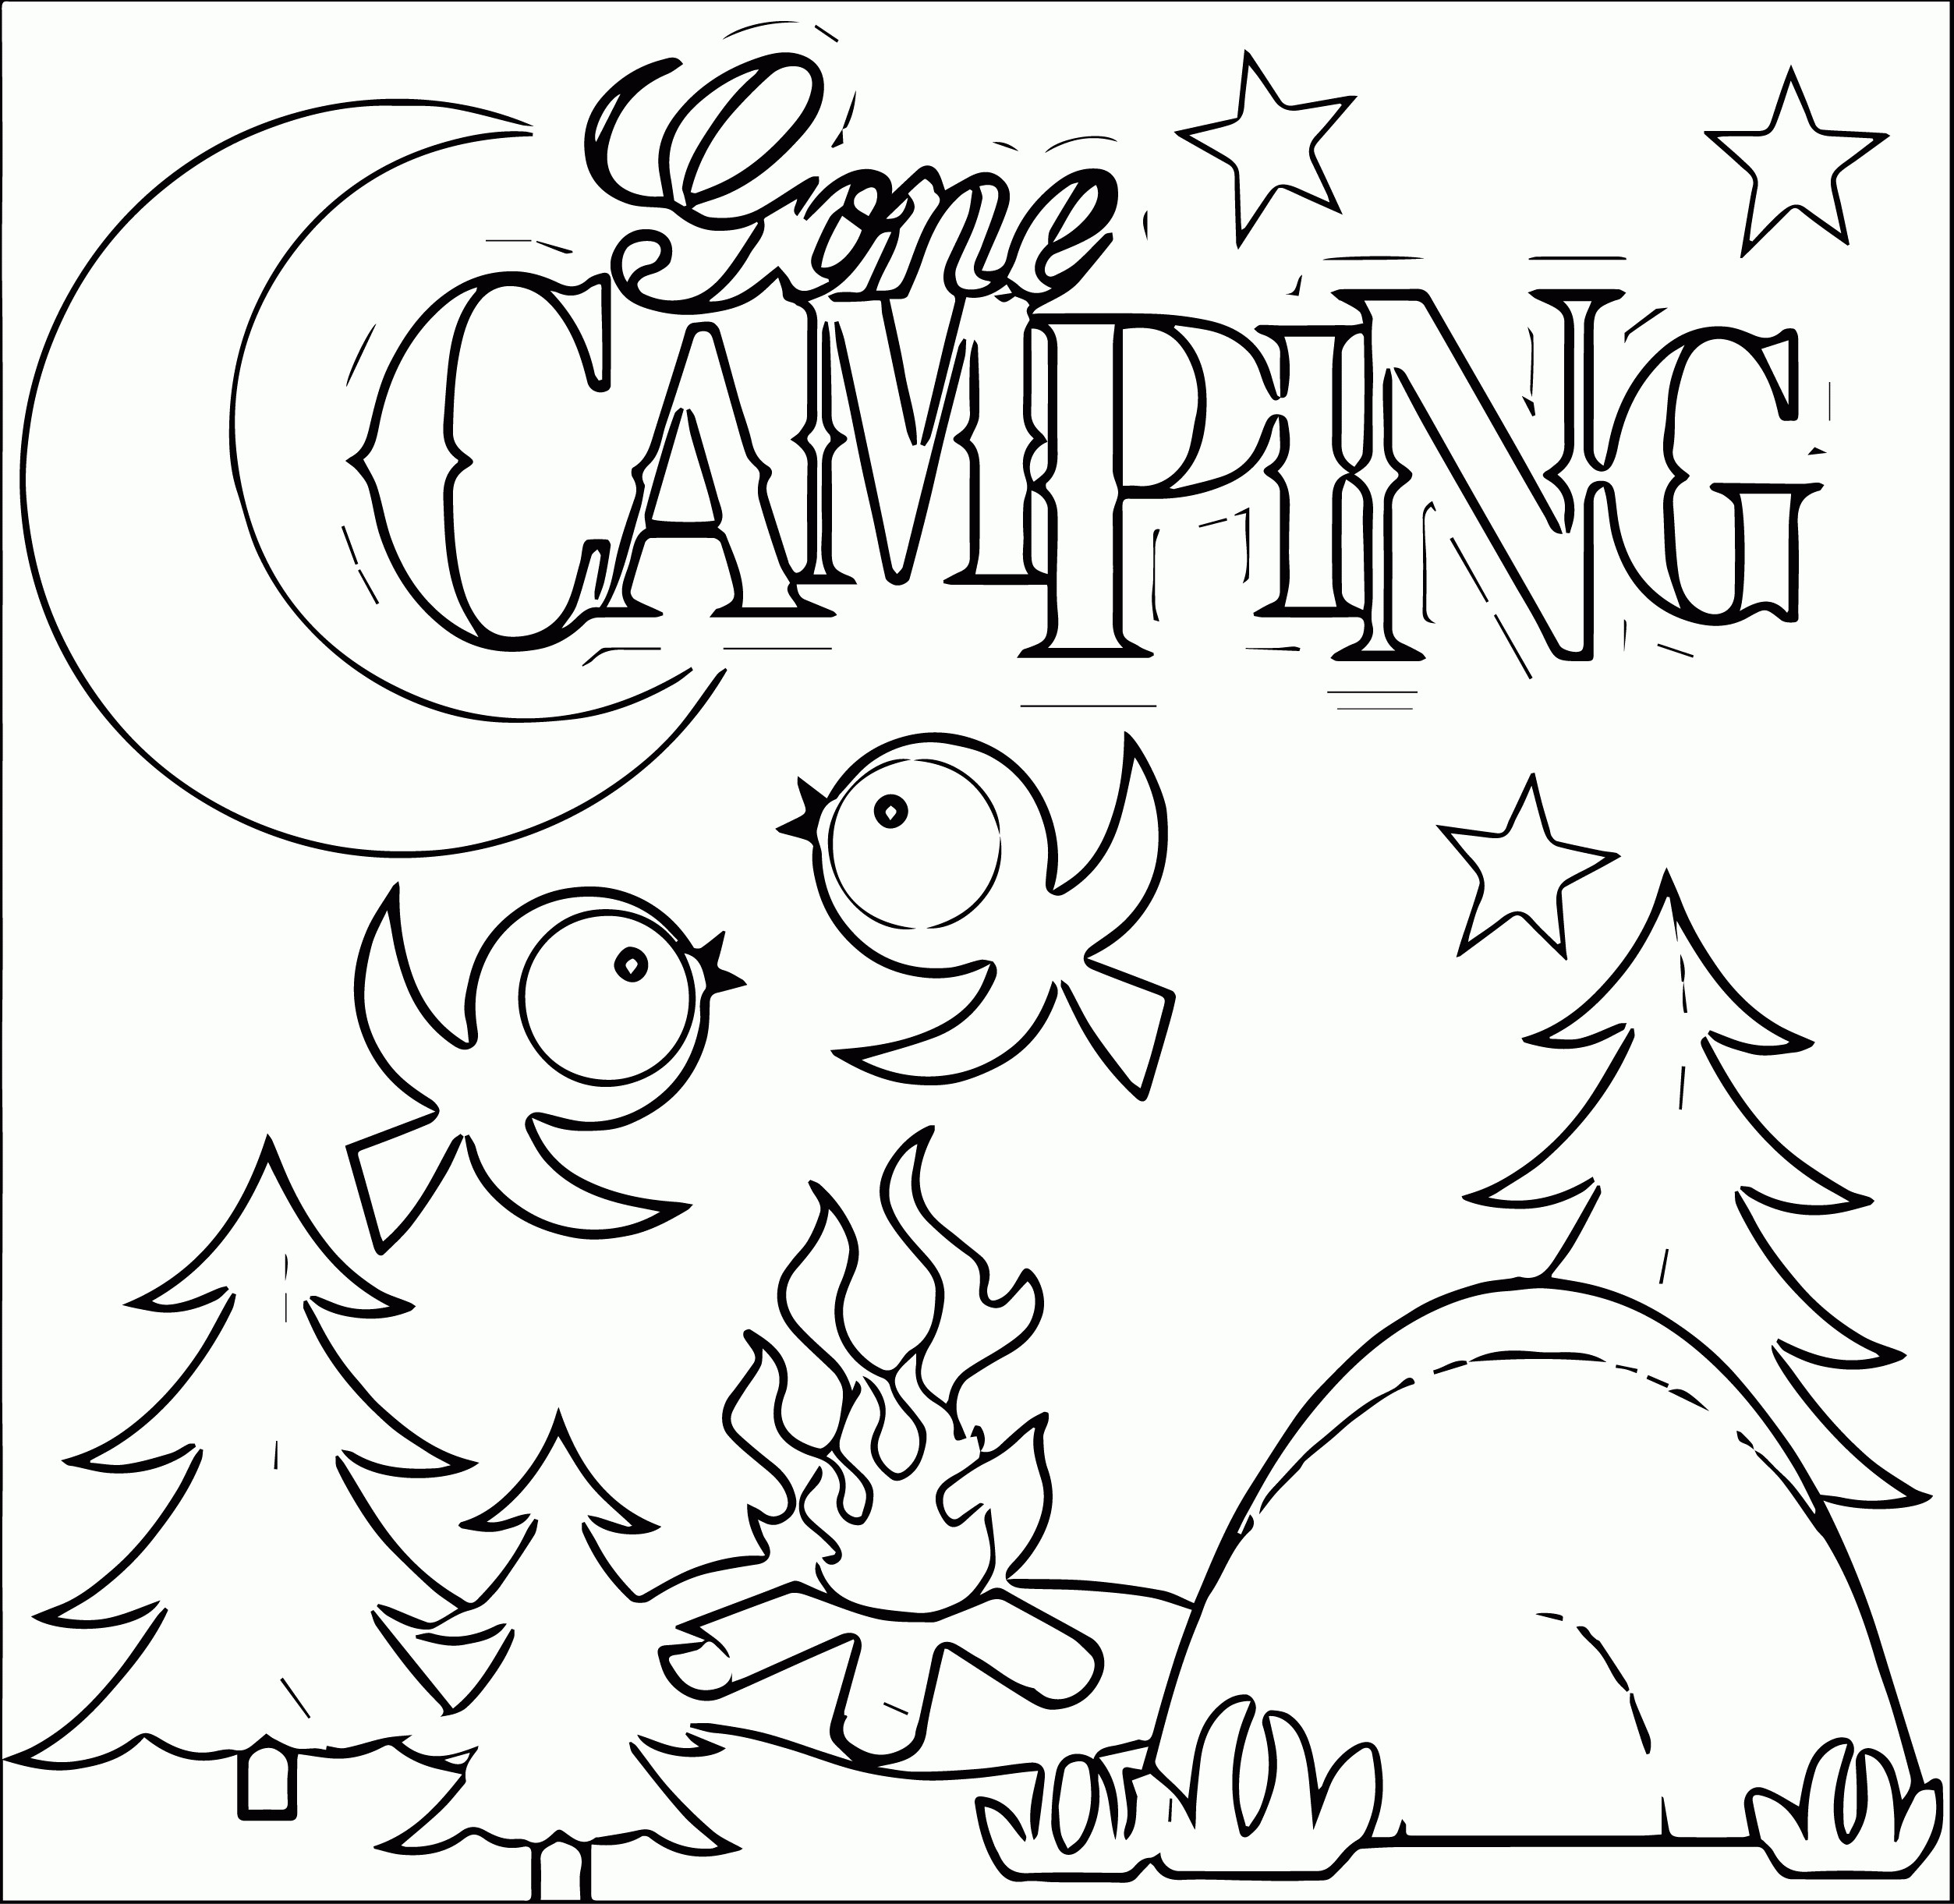 Camping Coloring Pages To Print
 Camping Coloring Pages Best Coloring Pages For Kids